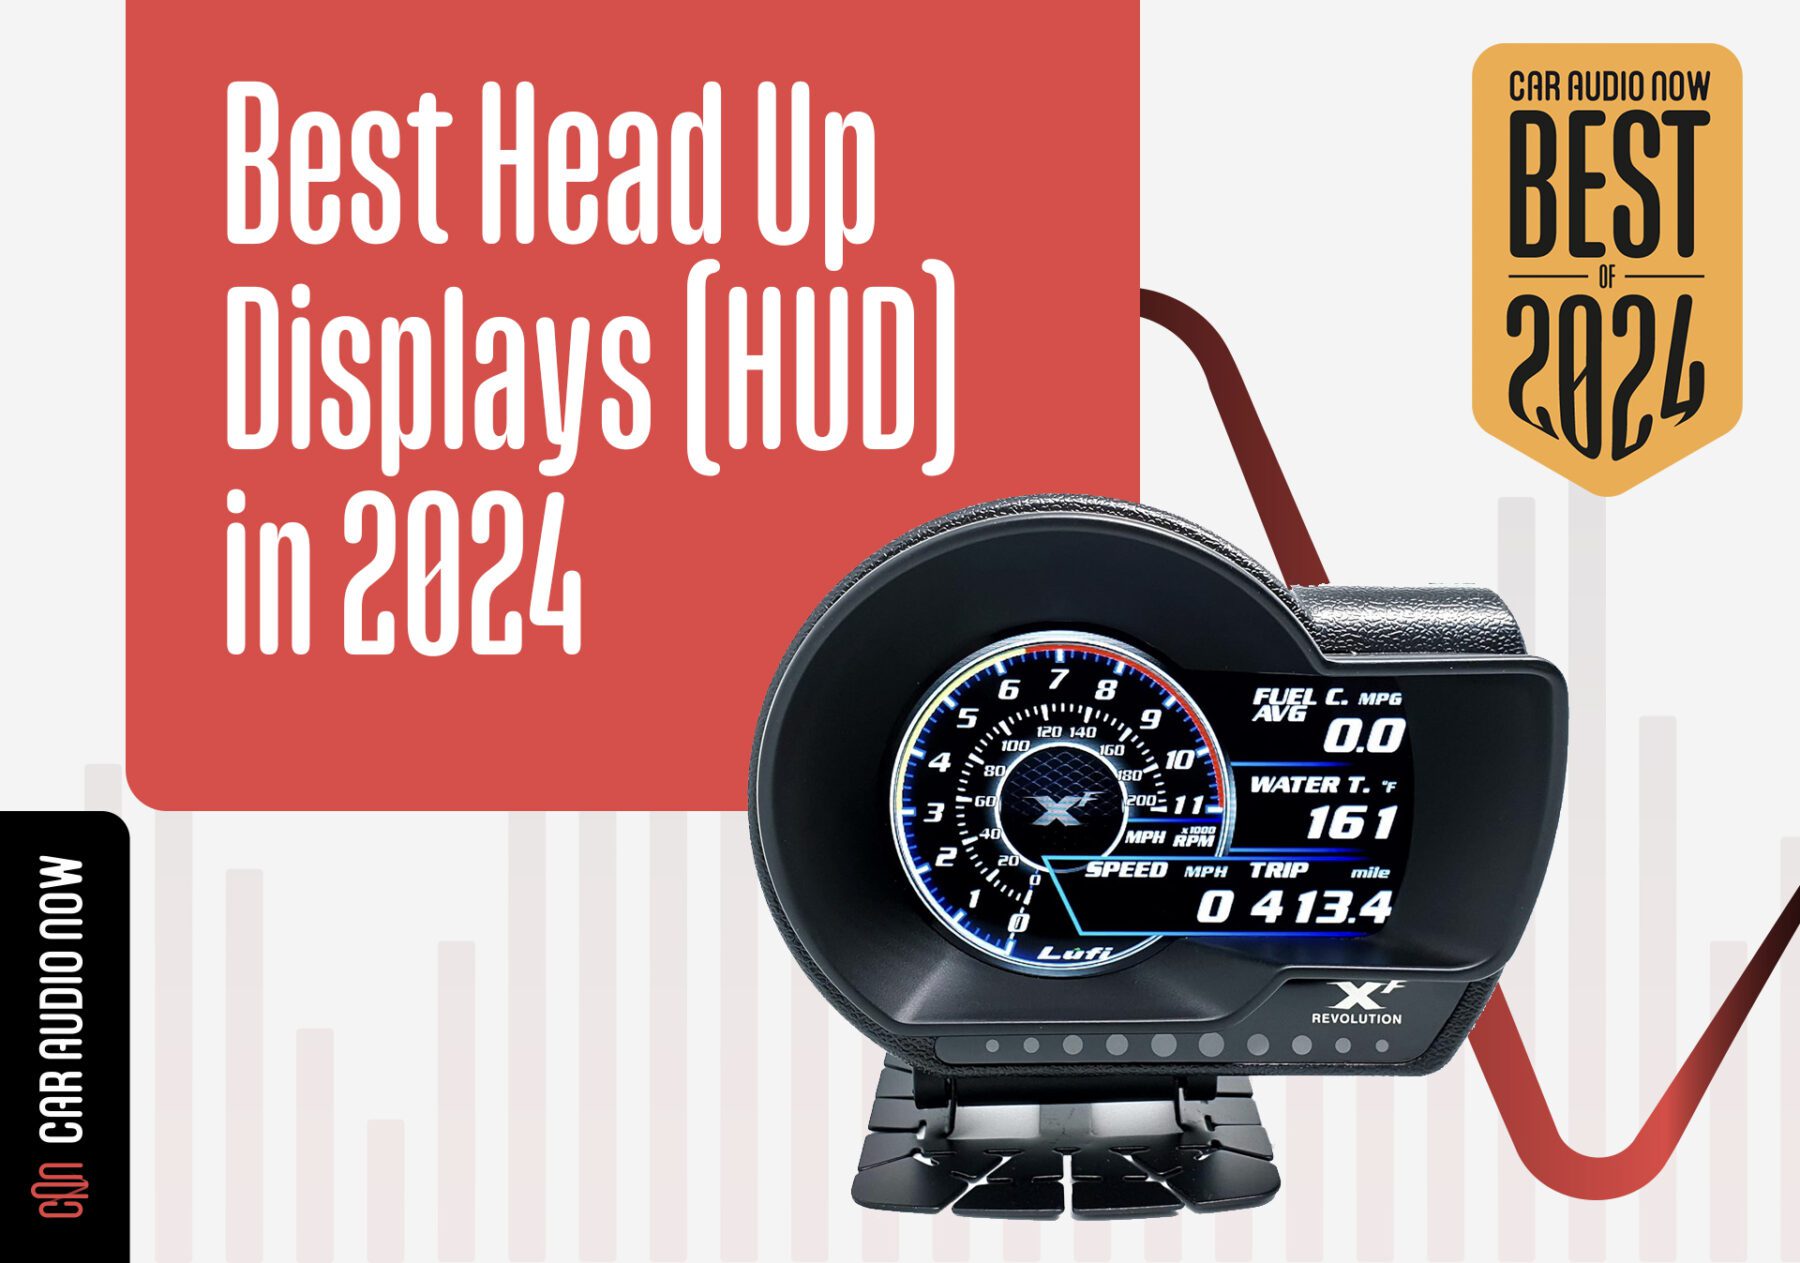 This wireless heads up display for your car is more than $150 off